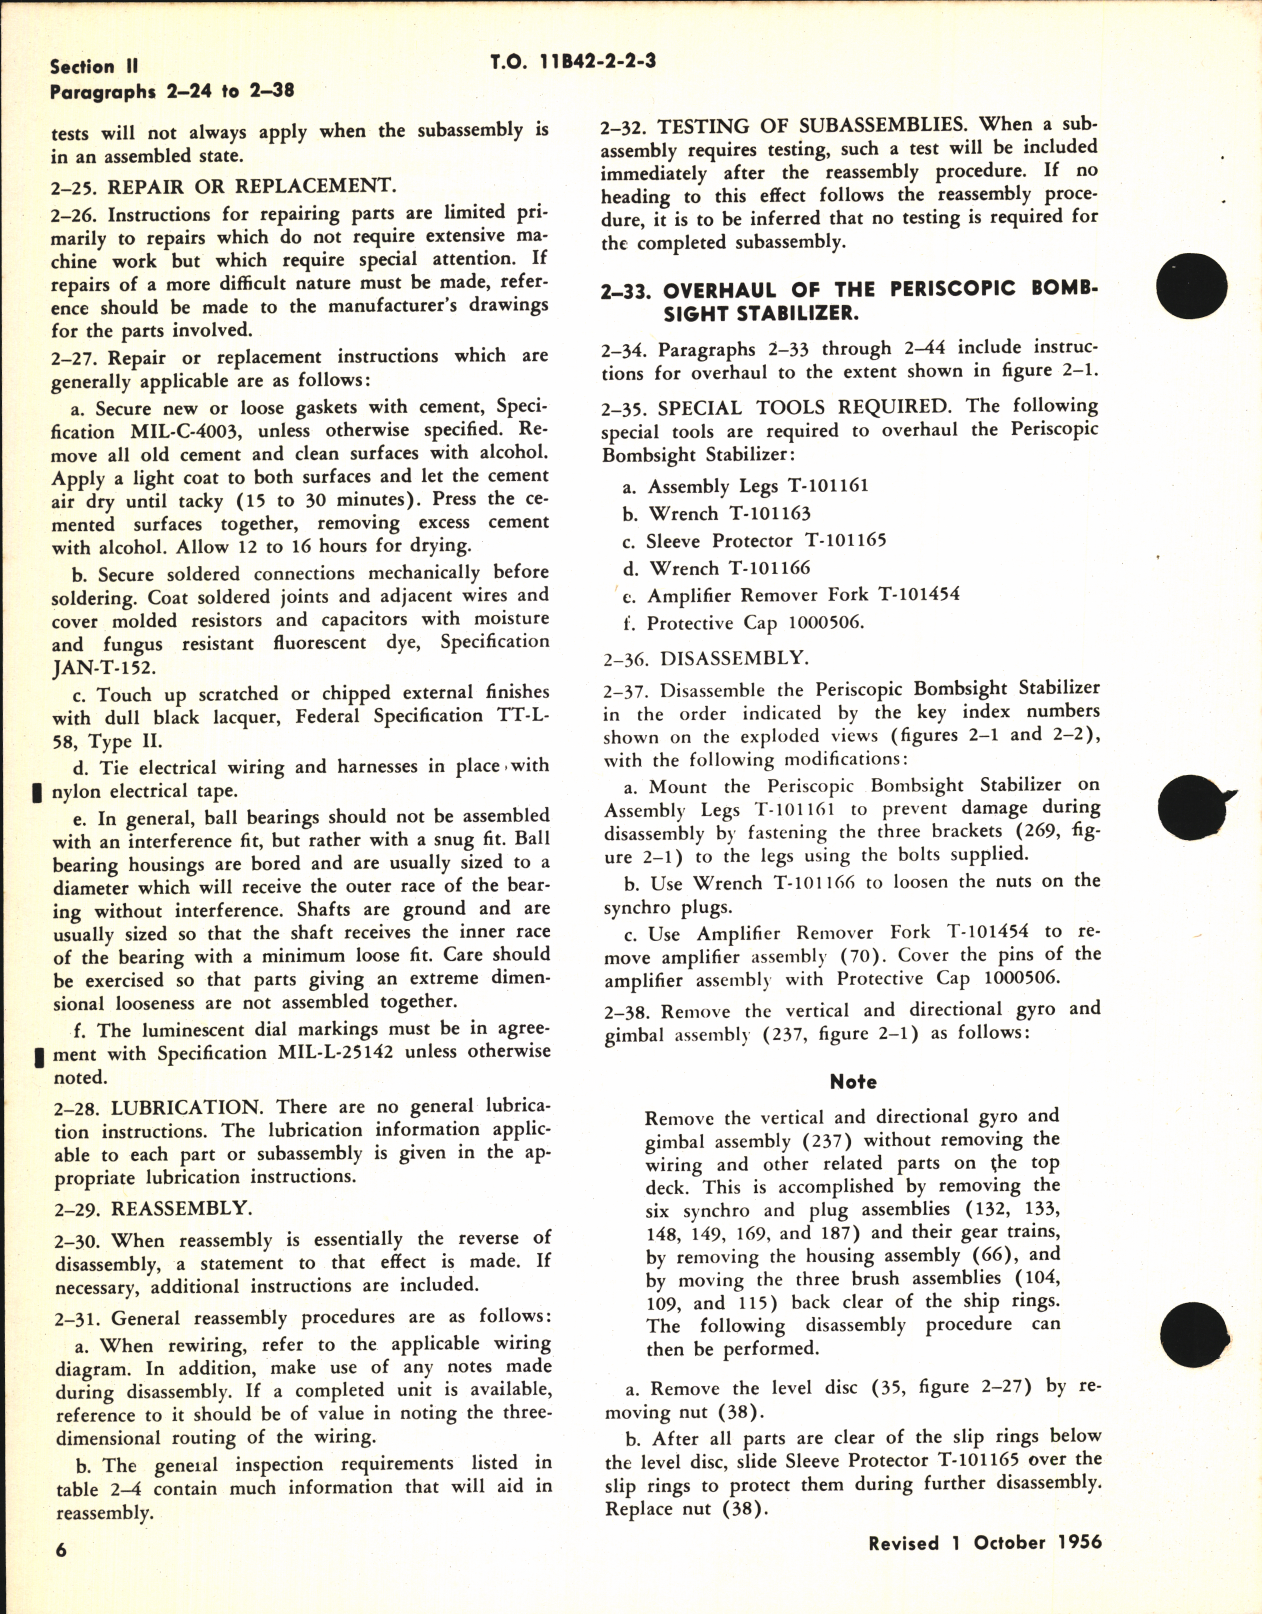 Sample page 8 from AirCorps Library document: Overhaul Instructions for Periscopic Bombsight Stabilizer Type B-1